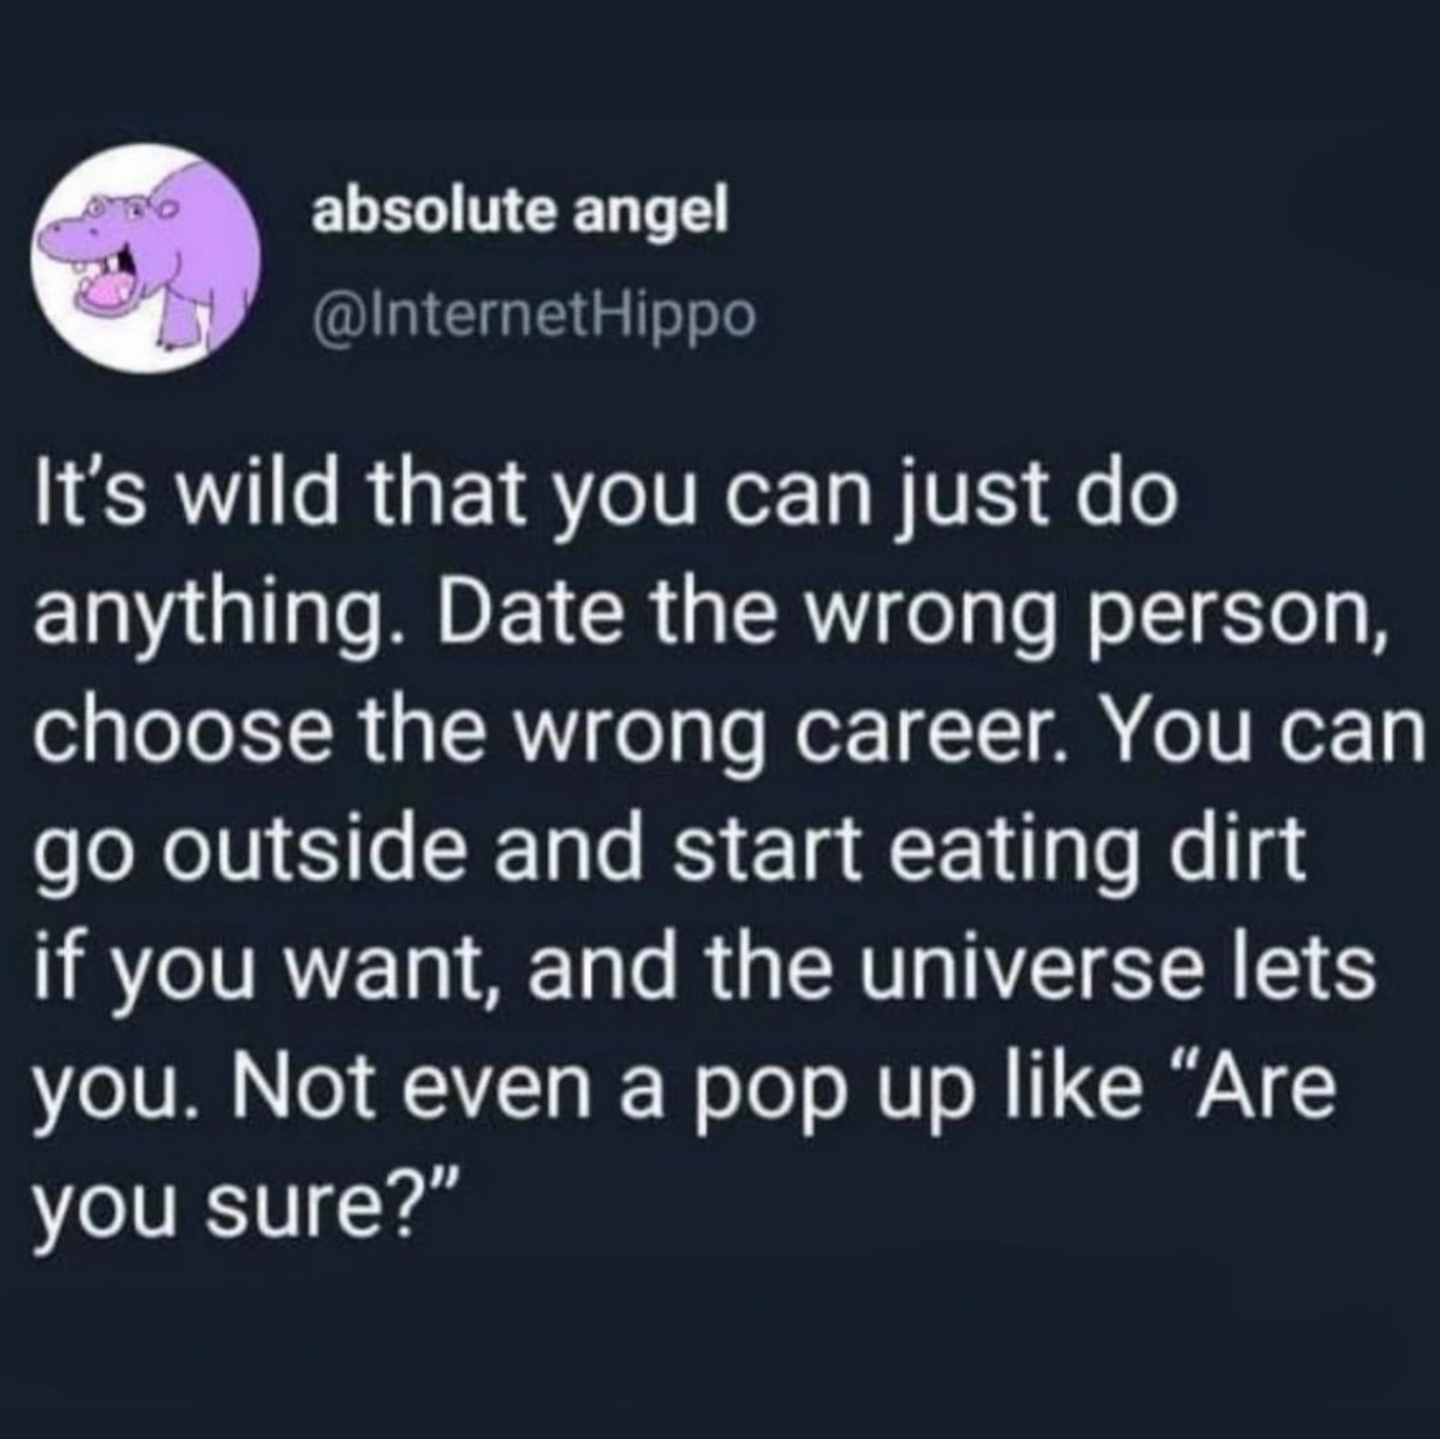 memes reddit twitter - anxiety memes - absolute angel Hippo It's wild that you can just do anything. Date the wrong person, choose the wrong career. You can go outside and start eating dirt if you want, and the universe lets you. Not even a pop up "Are yo